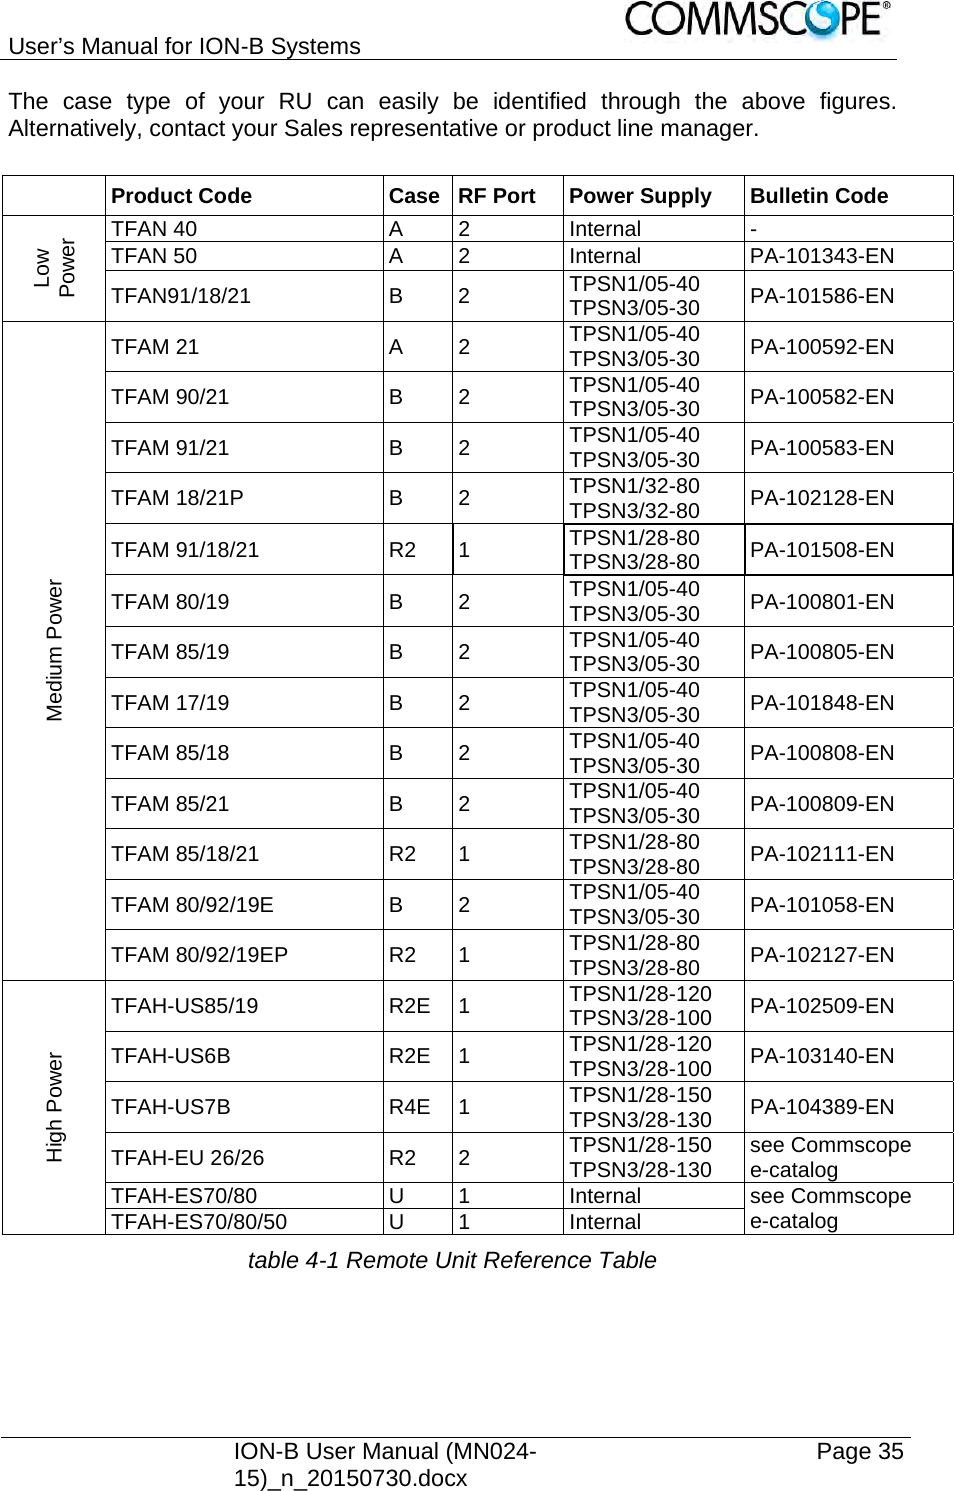 User’s Manual for ION-B Systems    ION-B User Manual (MN024-15)_n_20150730.docx  Page 35 The case type of your RU can easily be identified through the above figures. Alternatively, contact your Sales representative or product line manager.    Product Code  Case RF Port  Power Supply  Bulletin Code Low Power TFAN 40  A  2  Internal   - TFAN 50  A  2  Internal  PA-101343-EN TFAN91/18/21 B 2 TPSN1/05-40 TPSN3/05-30  PA-101586-EN Medium Power TFAM 21  A  2  TPSN1/05-40 TPSN3/05-30  PA-100592-EN TFAM 90/21  B  2  TPSN1/05-40 TPSN3/05-30  PA-100582-EN TFAM 91/21  B  2  TPSN1/05-40 TPSN3/05-30  PA-100583-EN TFAM 18/21P  B  2  TPSN1/32-80 TPSN3/32-80  PA-102128-EN TFAM 91/18/21  R2  1  TPSN1/28-80 TPSN3/28-80  PA-101508-EN TFAM 80/19  B  2  TPSN1/05-40 TPSN3/05-30  PA-100801-EN TFAM 85/19  B  2  TPSN1/05-40 TPSN3/05-30  PA-100805-EN TFAM 17/19  B  2  TPSN1/05-40 TPSN3/05-30  PA-101848-EN TFAM 85/18  B  2  TPSN1/05-40 TPSN3/05-30  PA-100808-EN TFAM 85/21  B  2  TPSN1/05-40 TPSN3/05-30  PA-100809-EN TFAM 85/18/21  R2  1  TPSN1/28-80 TPSN3/28-80  PA-102111-EN TFAM 80/92/19E  B  2  TPSN1/05-40 TPSN3/05-30  PA-101058-EN TFAM 80/92/19EP  R2  1  TPSN1/28-80 TPSN3/28-80  PA-102127-EN High Power TFAH-US85/19 R2E 1 TPSN1/28-120 TPSN3/28-100  PA-102509-EN TFAH-US6B R2E 1 TPSN1/28-120 TPSN3/28-100  PA-103140-EN TFAH-US7B R4E 1 TPSN1/28-150 TPSN3/28-130  PA-104389-EN TFAH-EU 26/26  R2  2  TPSN1/28-150 TPSN3/28-130  see Commscope  e-catalog TFAH-ES70/80 U 1 Internal see Commscope  e-catalog TFAH-ES70/80/50 U 1 Internal table 4-1 Remote Unit Reference Table 